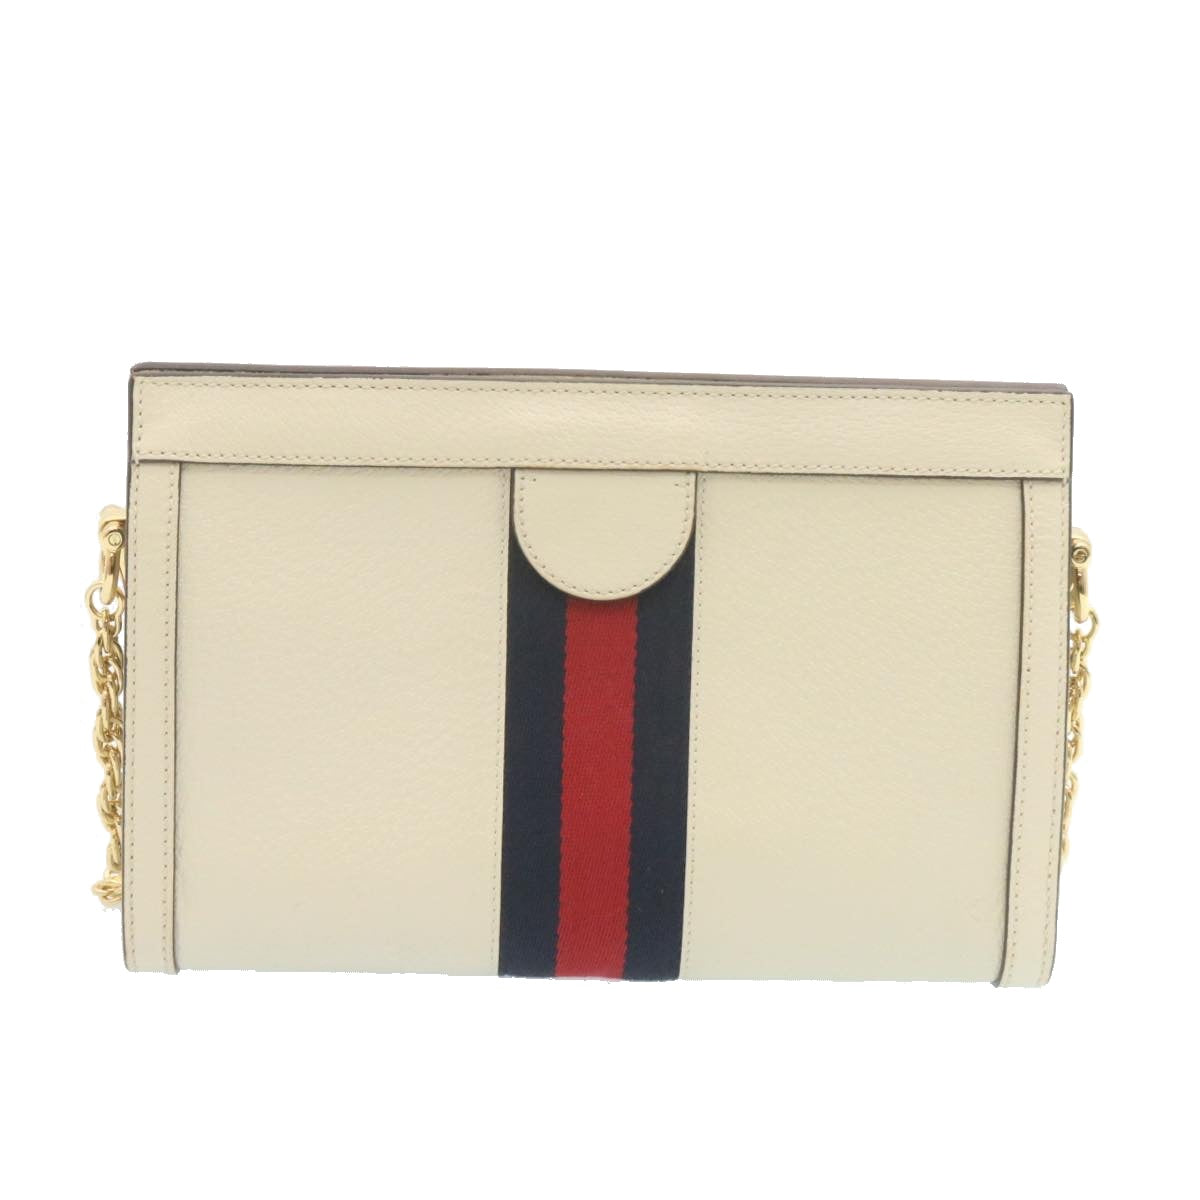 GUCCI Sherry Line Chain Shoulder Bag Leather White Red Navy Auth ar5967 - 0